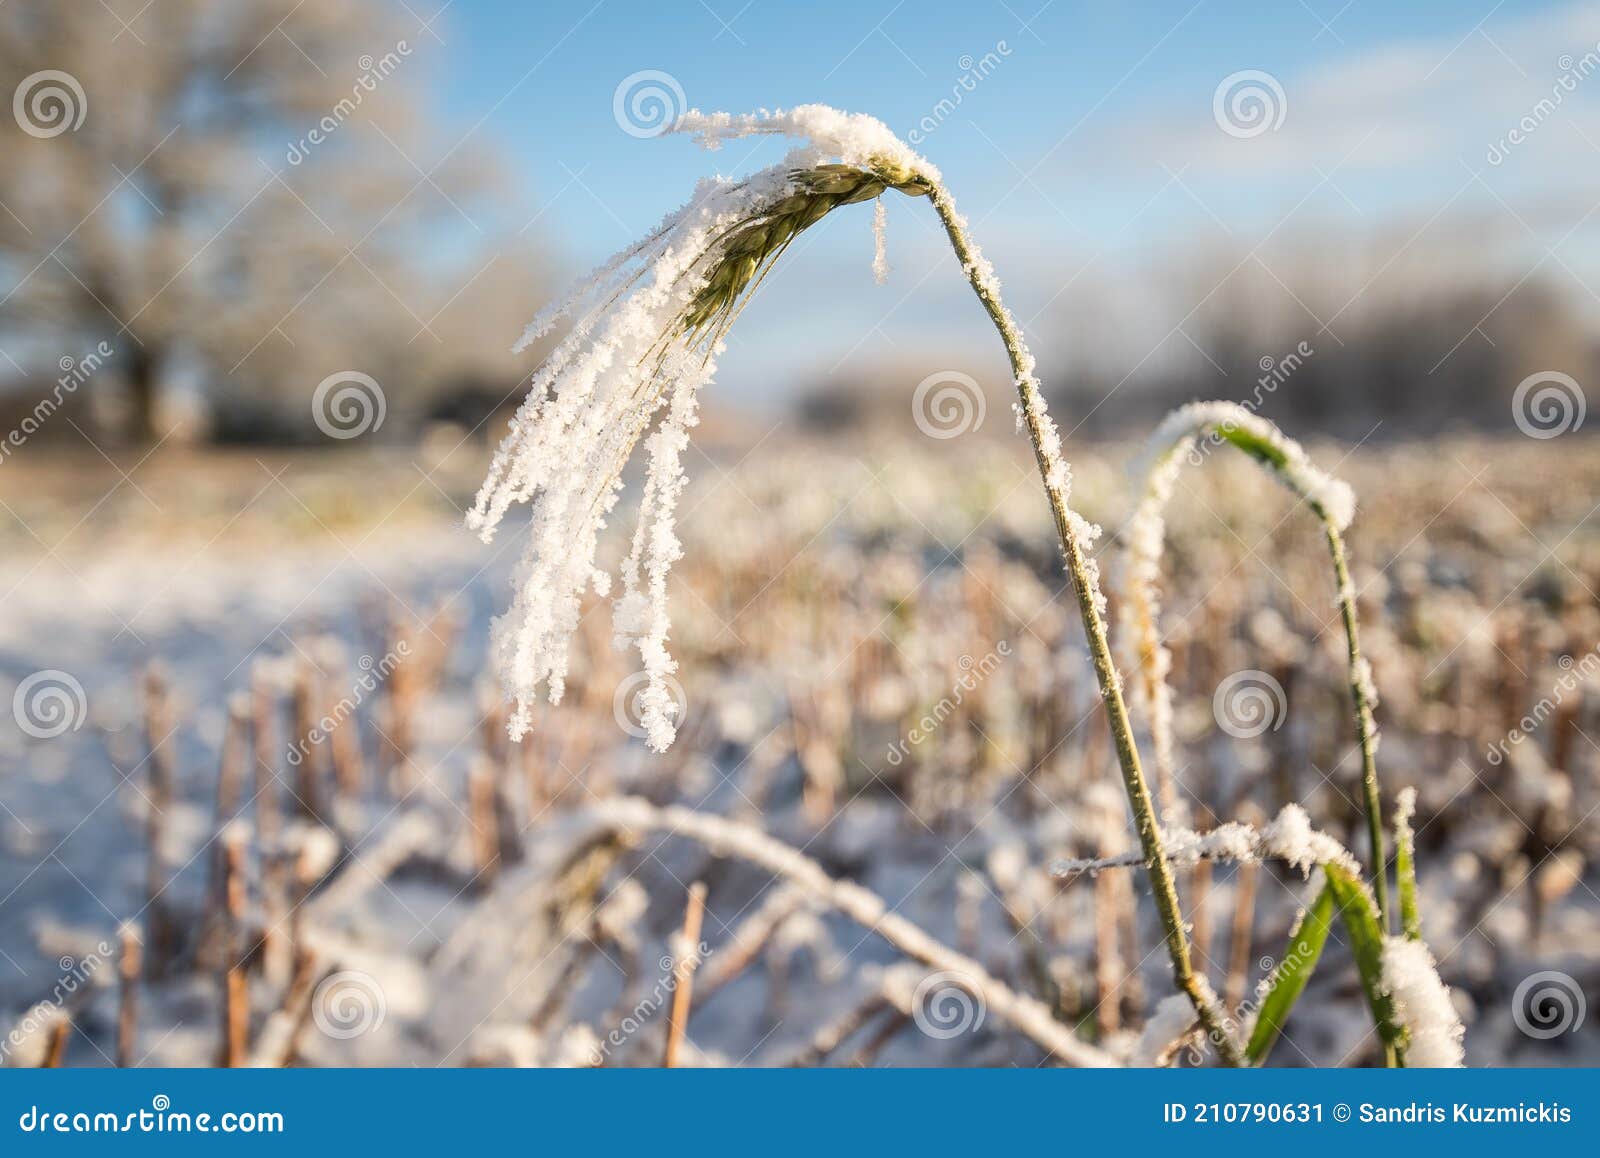 Spike of Cereal in the Frosty Day Stock Image - Image of light ...